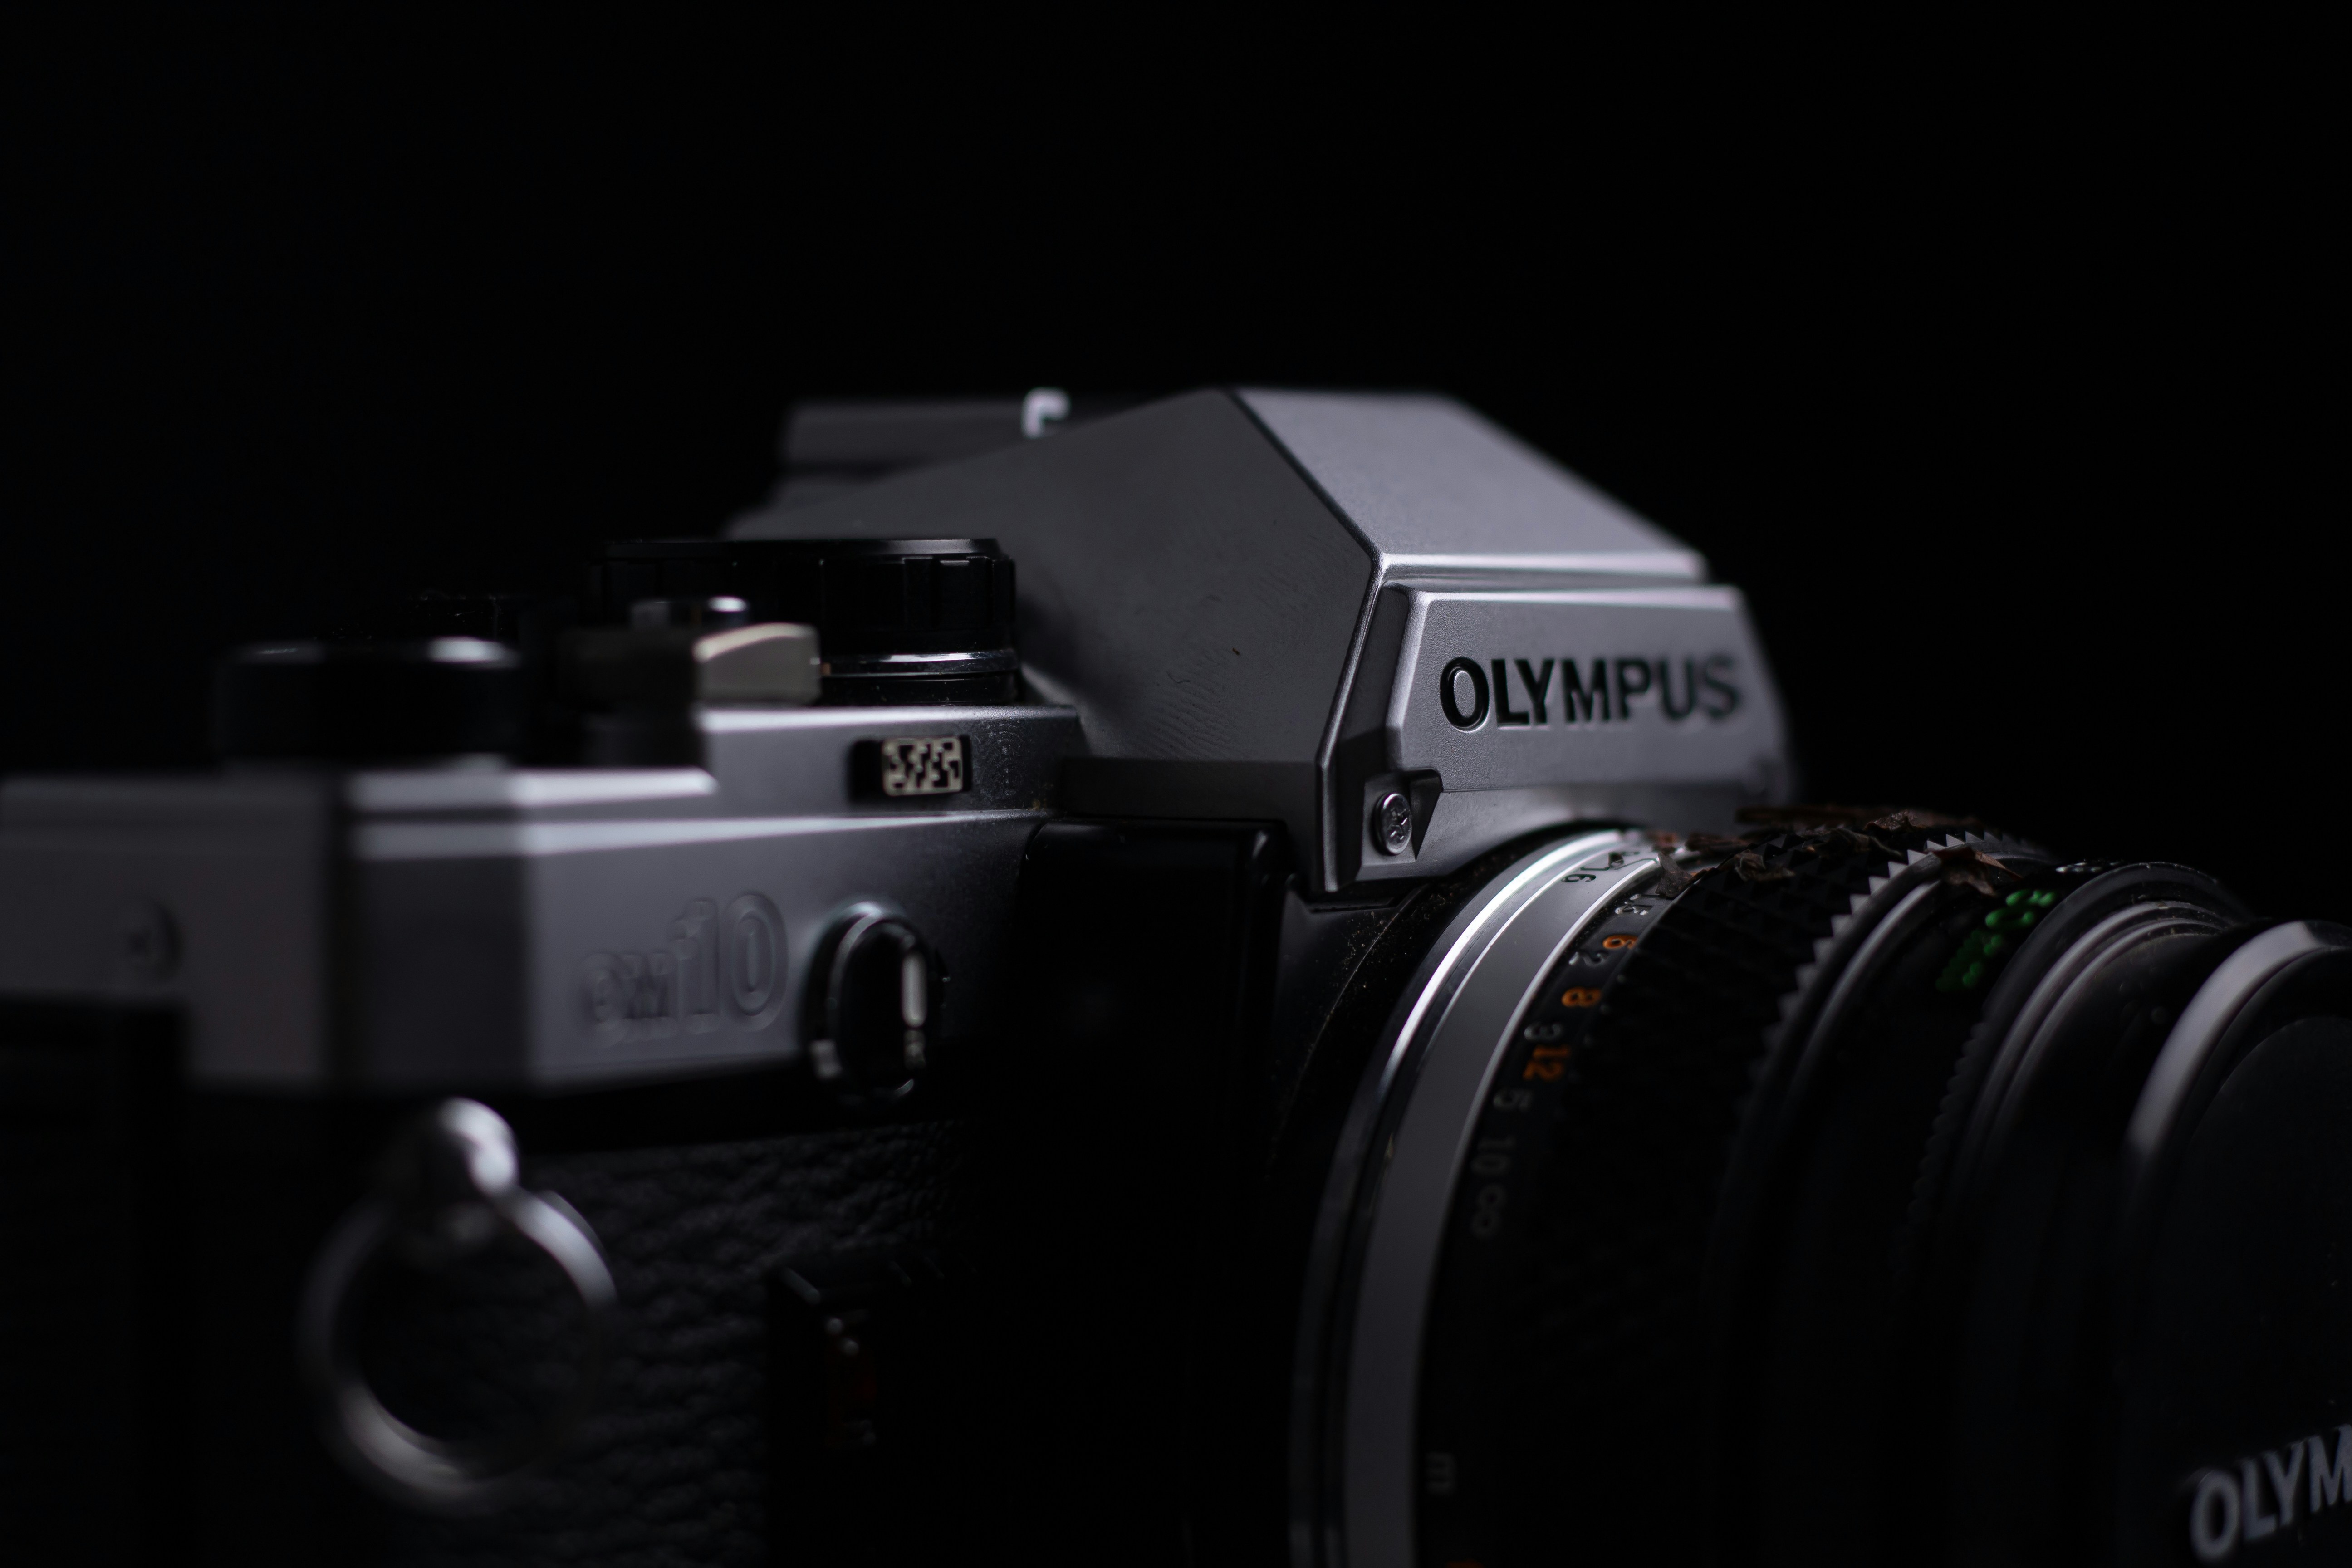 Olympus OM-10 analogue camera studio close up shot. Shot on Canon EOS 1300D w/ 18-55mm f3.5 - 5.6